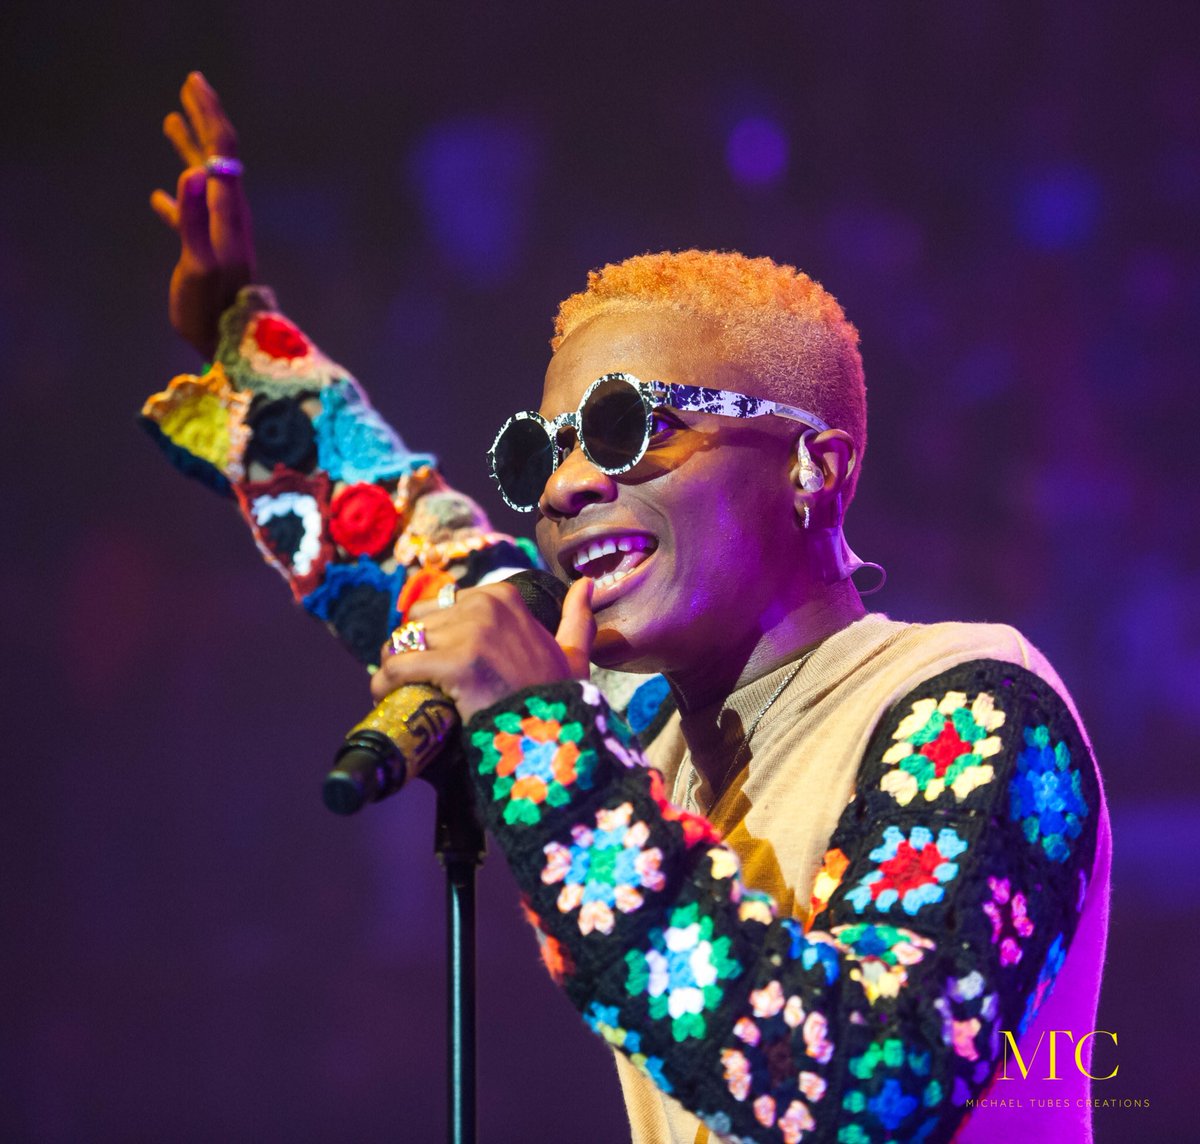 Wizkid became the first male African artist to sell out the Royal Albert Hall in London as the sole headliner. He joins Mariam Makeba (1967) as the only African artists to achieve this.